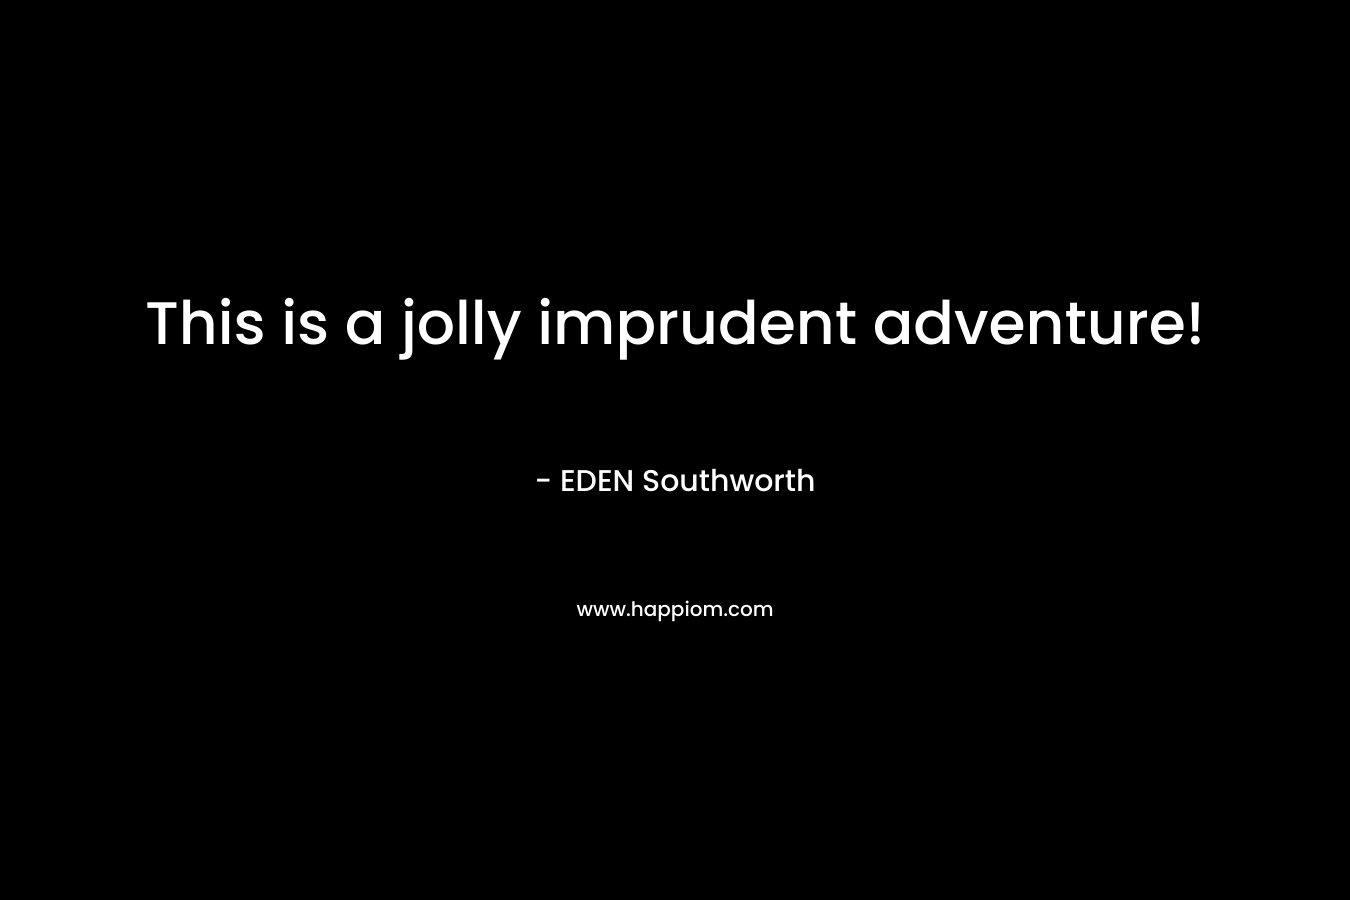 This is a jolly imprudent adventure! – EDEN Southworth